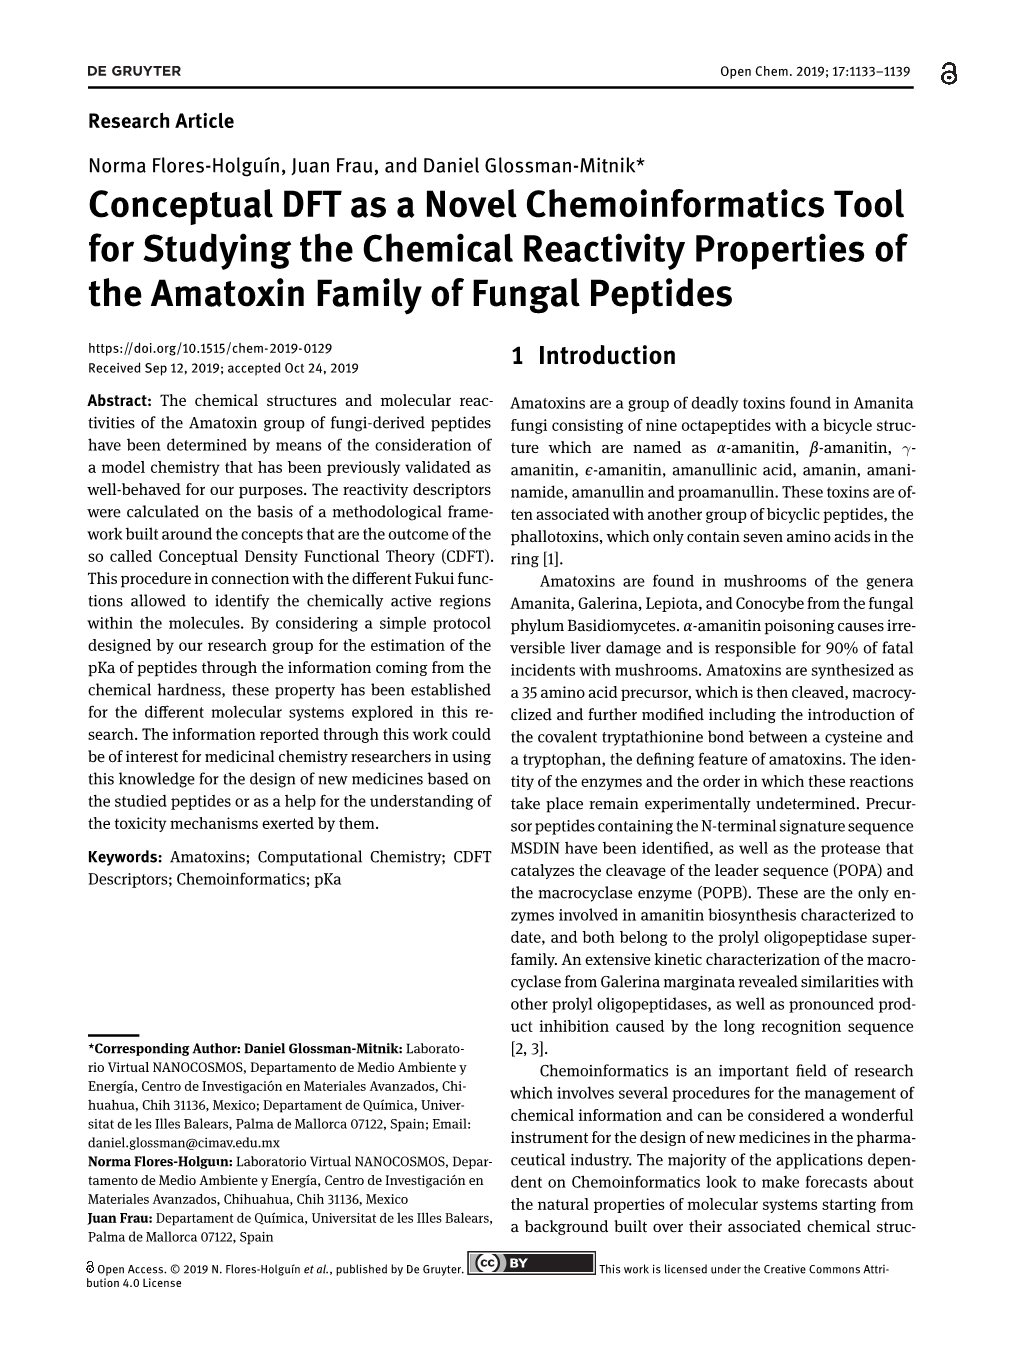 Conceptual DFT As a Novel Chemoinformatics Tool for Studying